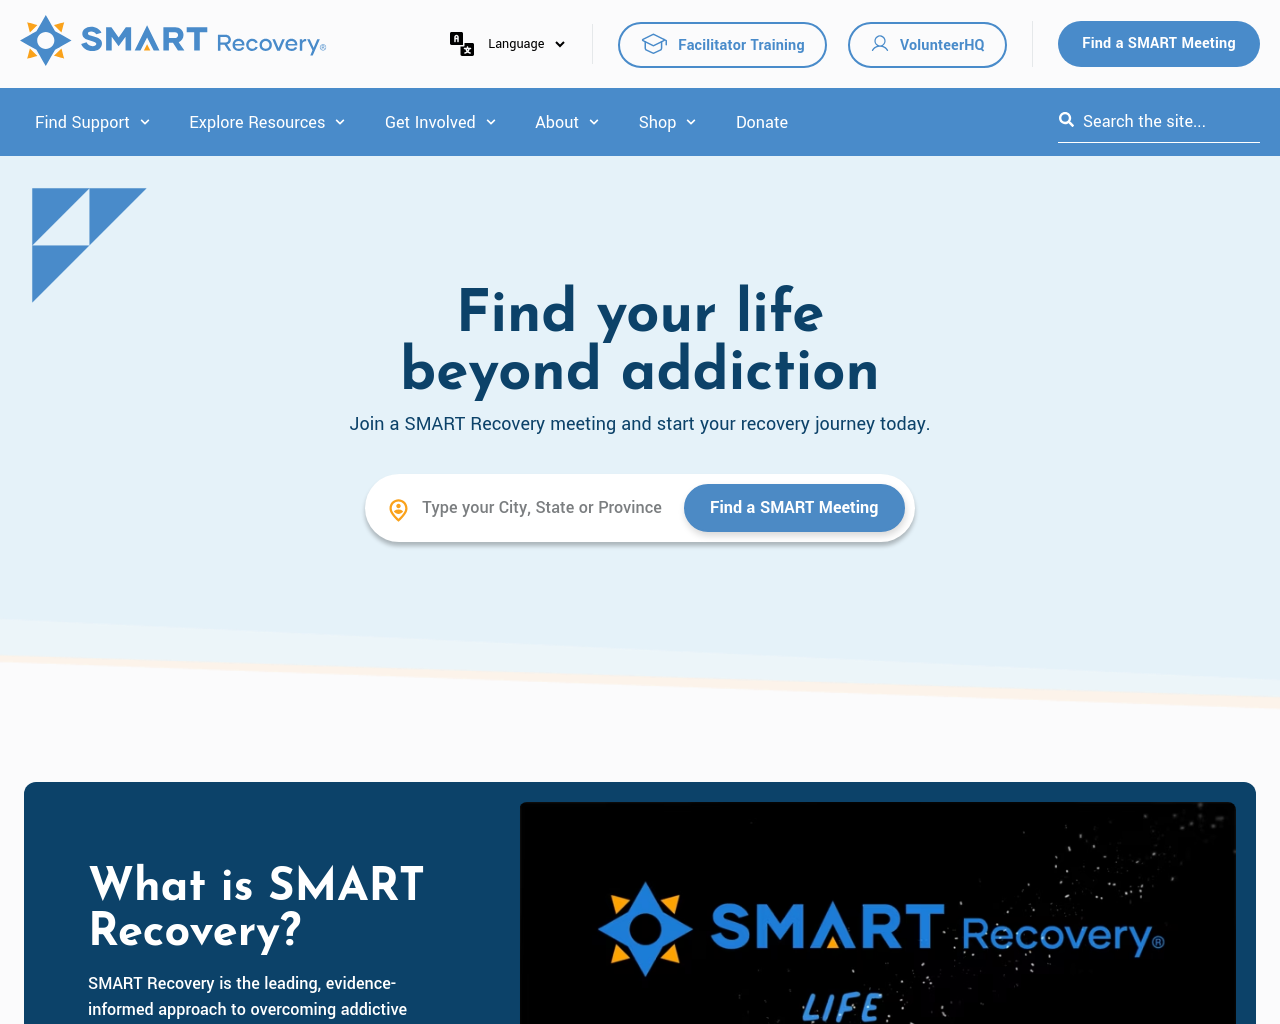 smartrecovery.org